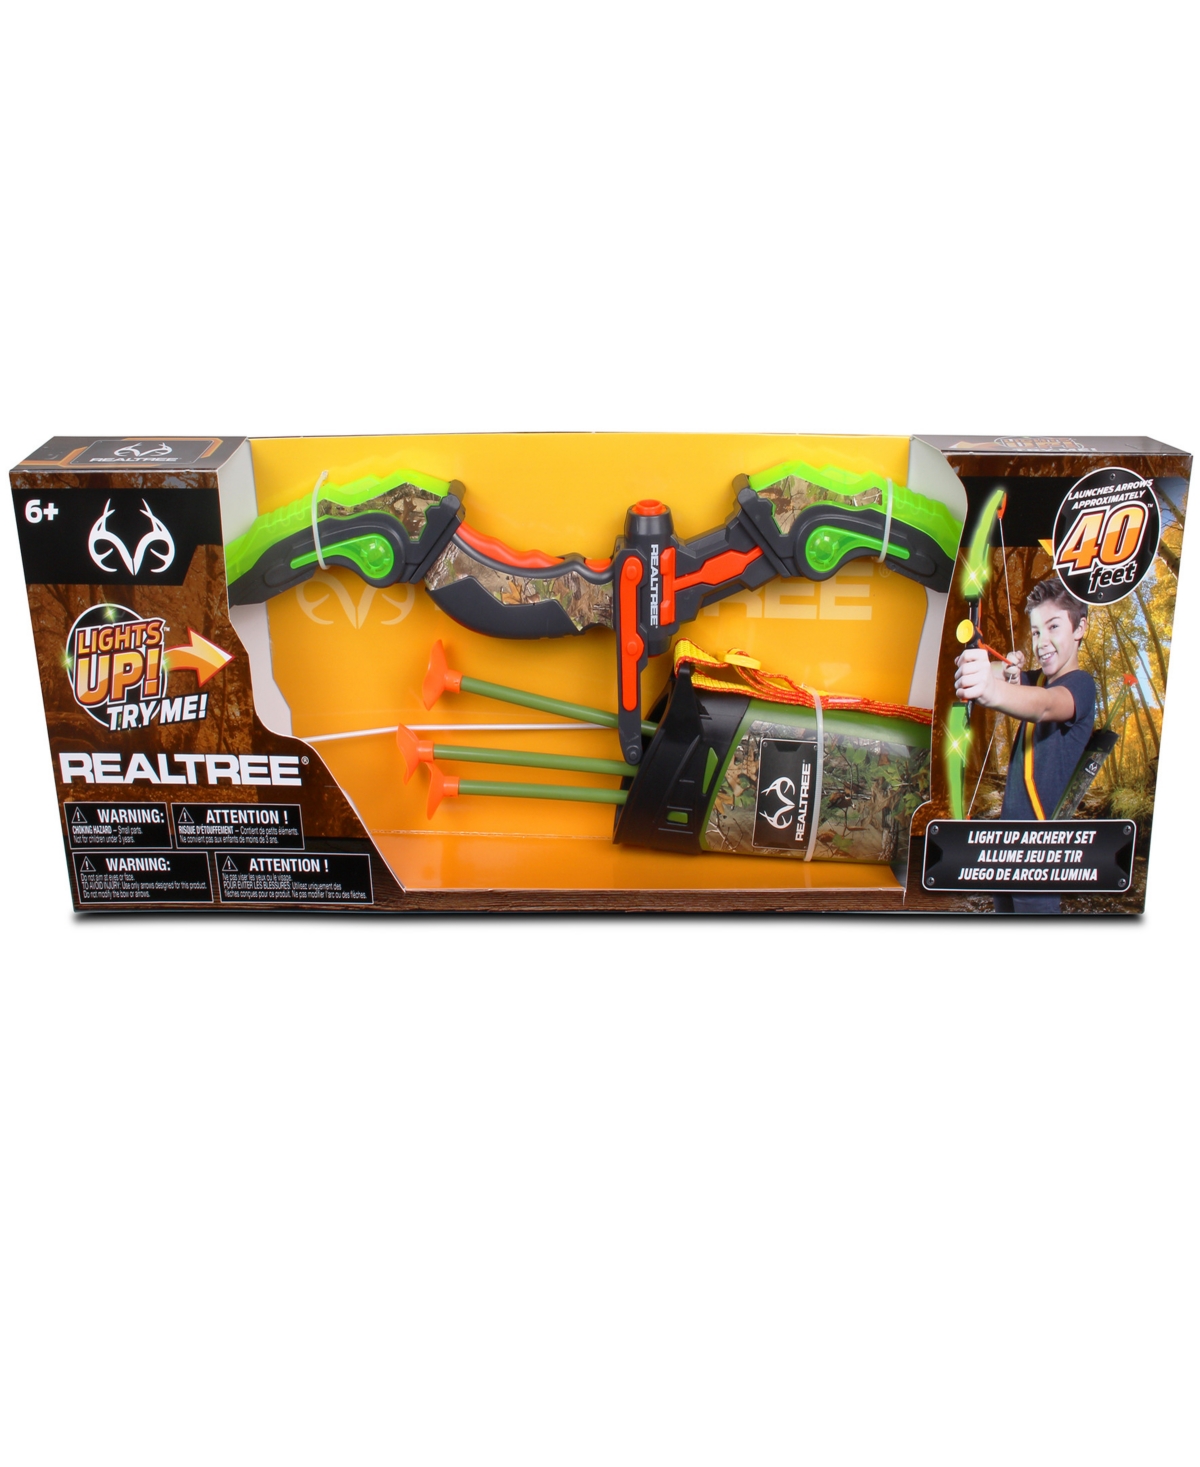 Realtree Kids' Nkok Light Up Archery Set 24.5" Green With Quiver, 25020, Arrows Can Shoot Up To 40', 3 Arrows Targe In Multi